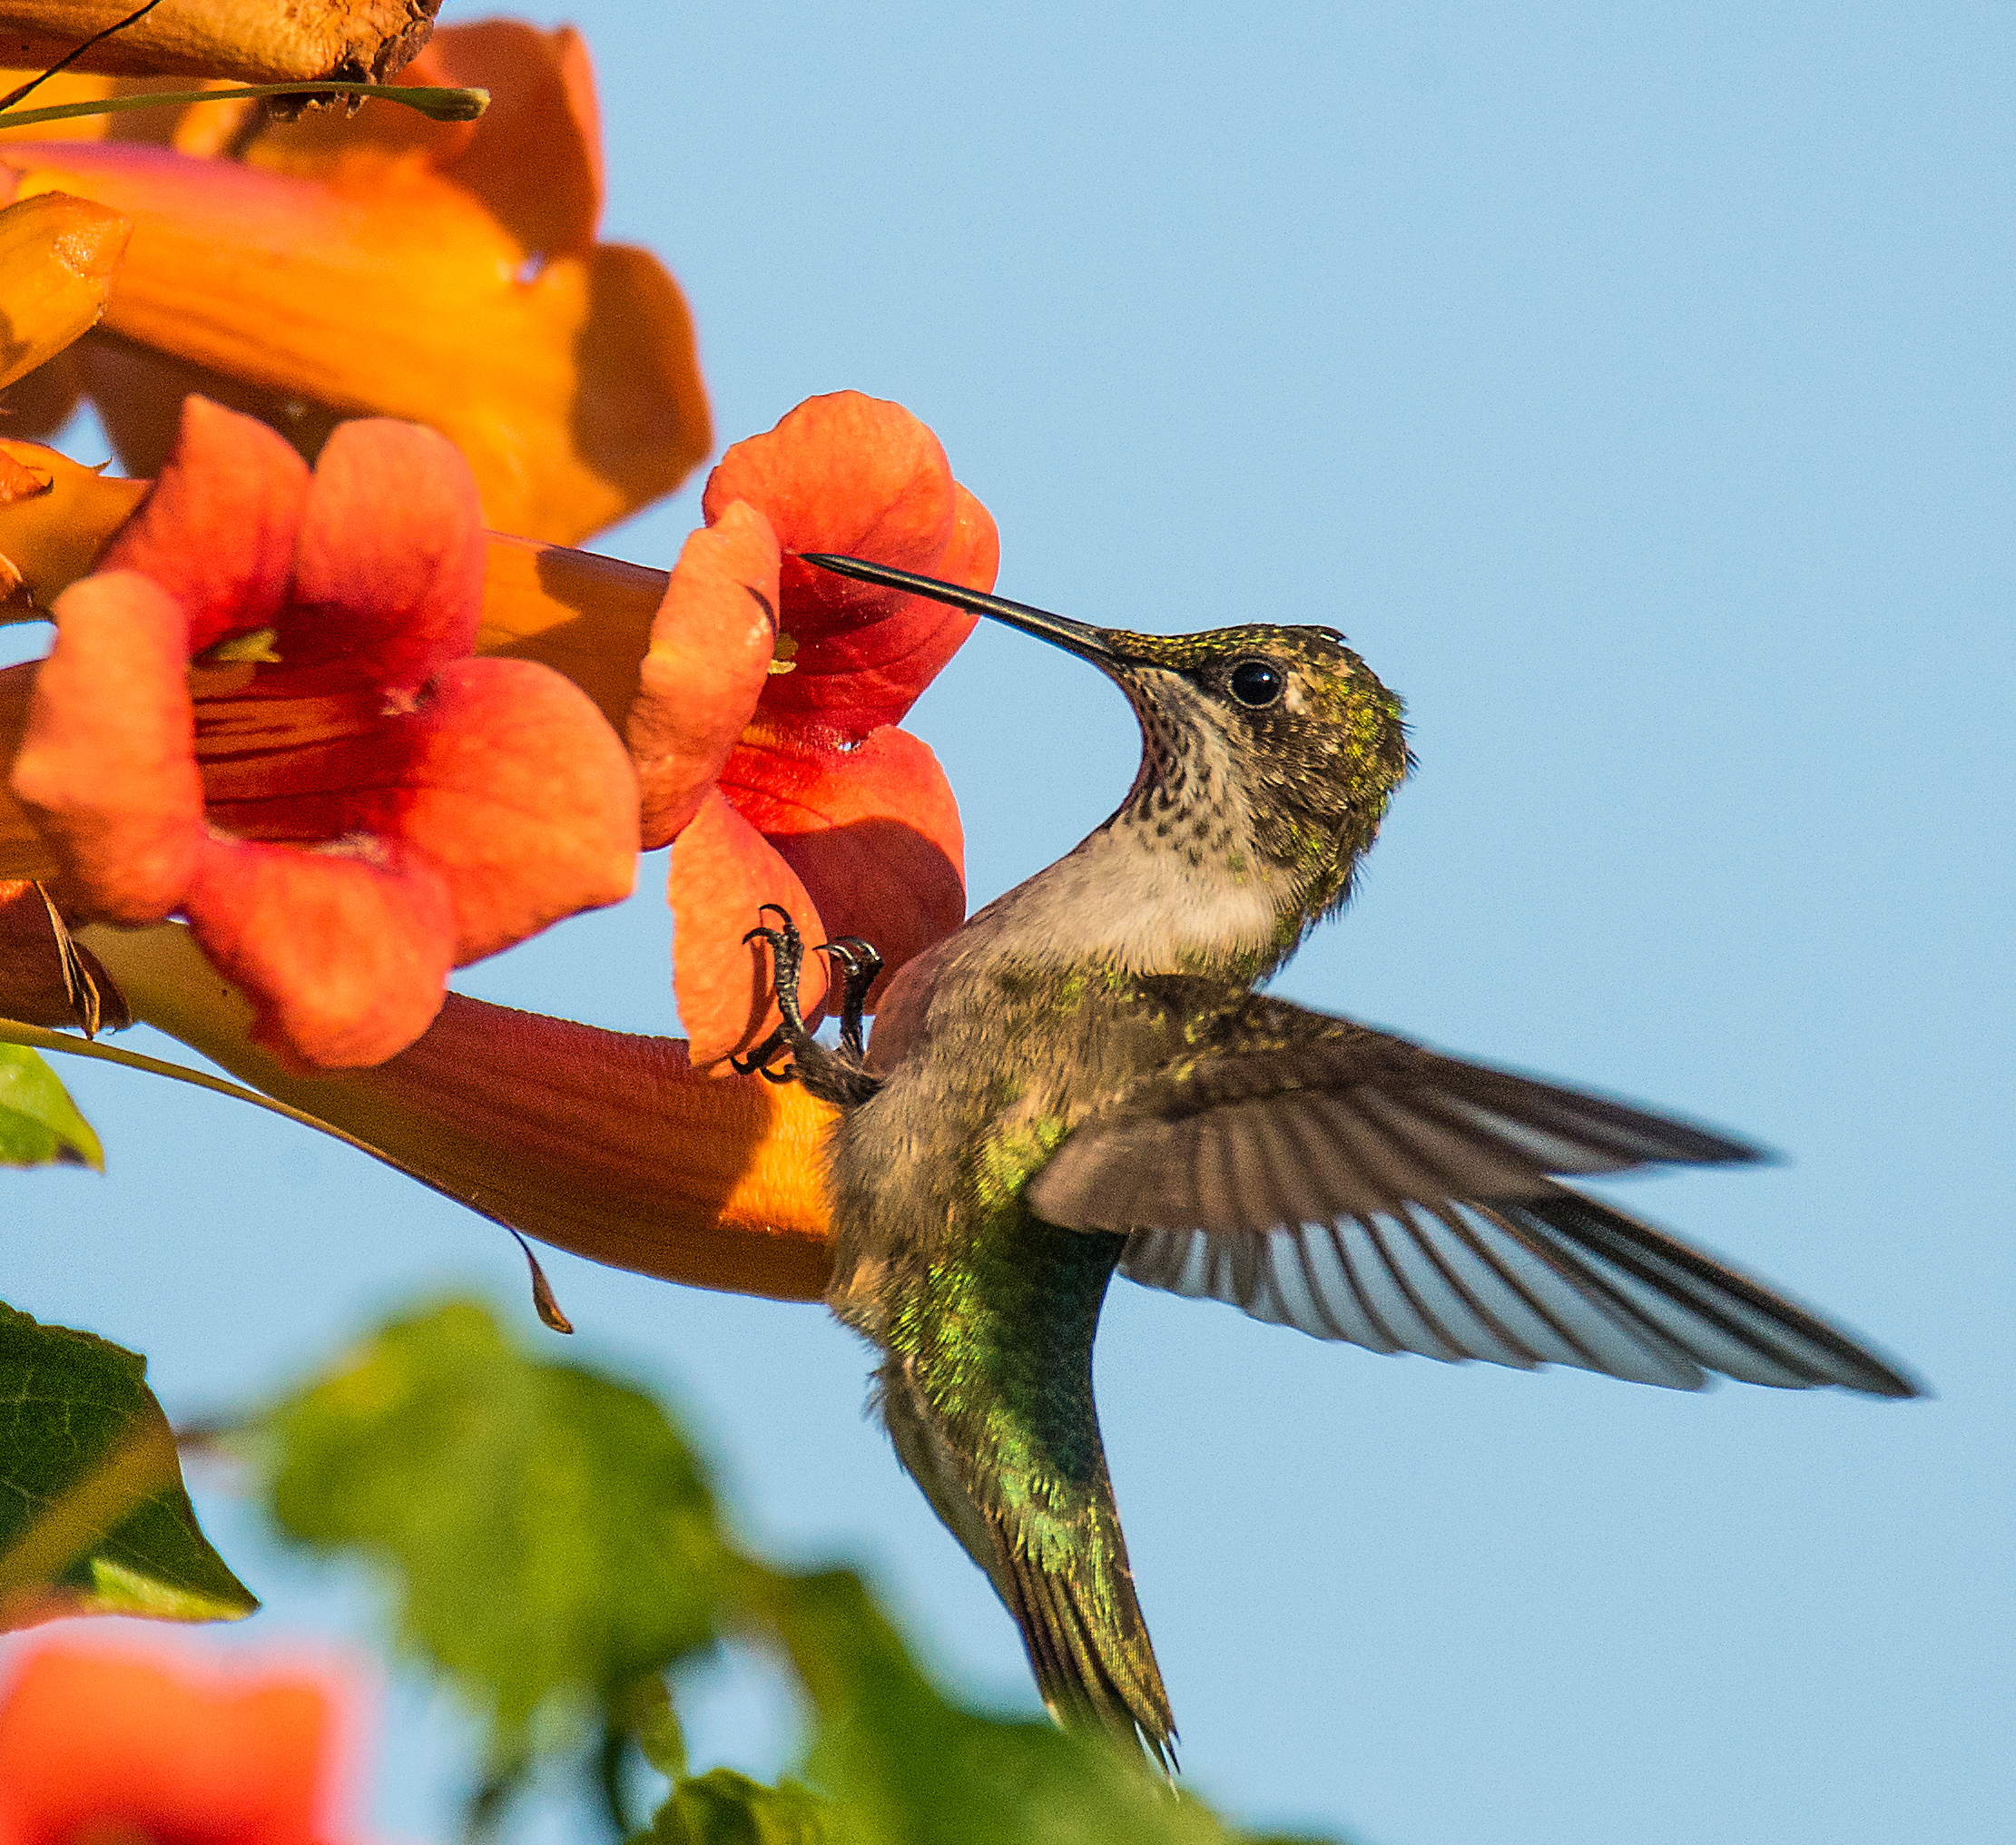 In recent years, Ruby-throated Hummingbirds have nested in the South Garden, likely drawn the native Trumpet Creeper that thrives there. Photo: Patricia McGuire/Audubon Photography Awards